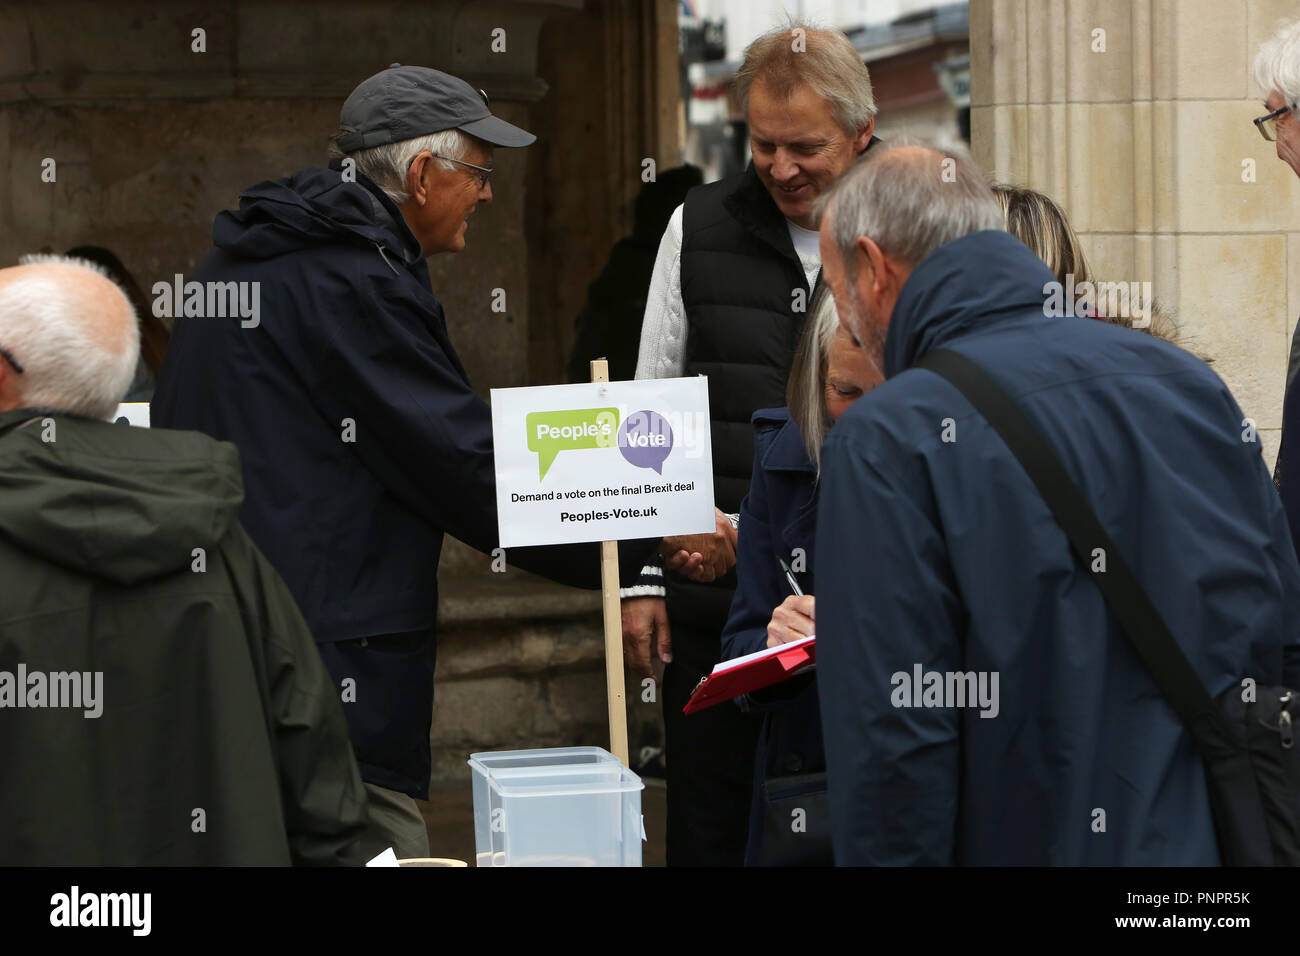 Chichester, West Sussex, UK. A group collecting signatures in Chichester City Centre to demand a 'Peoples Vote' on the final Brexit Deal.  Saturday 22nd September 2018 © Sam Stephenson/Alamy Live News. Stock Photo